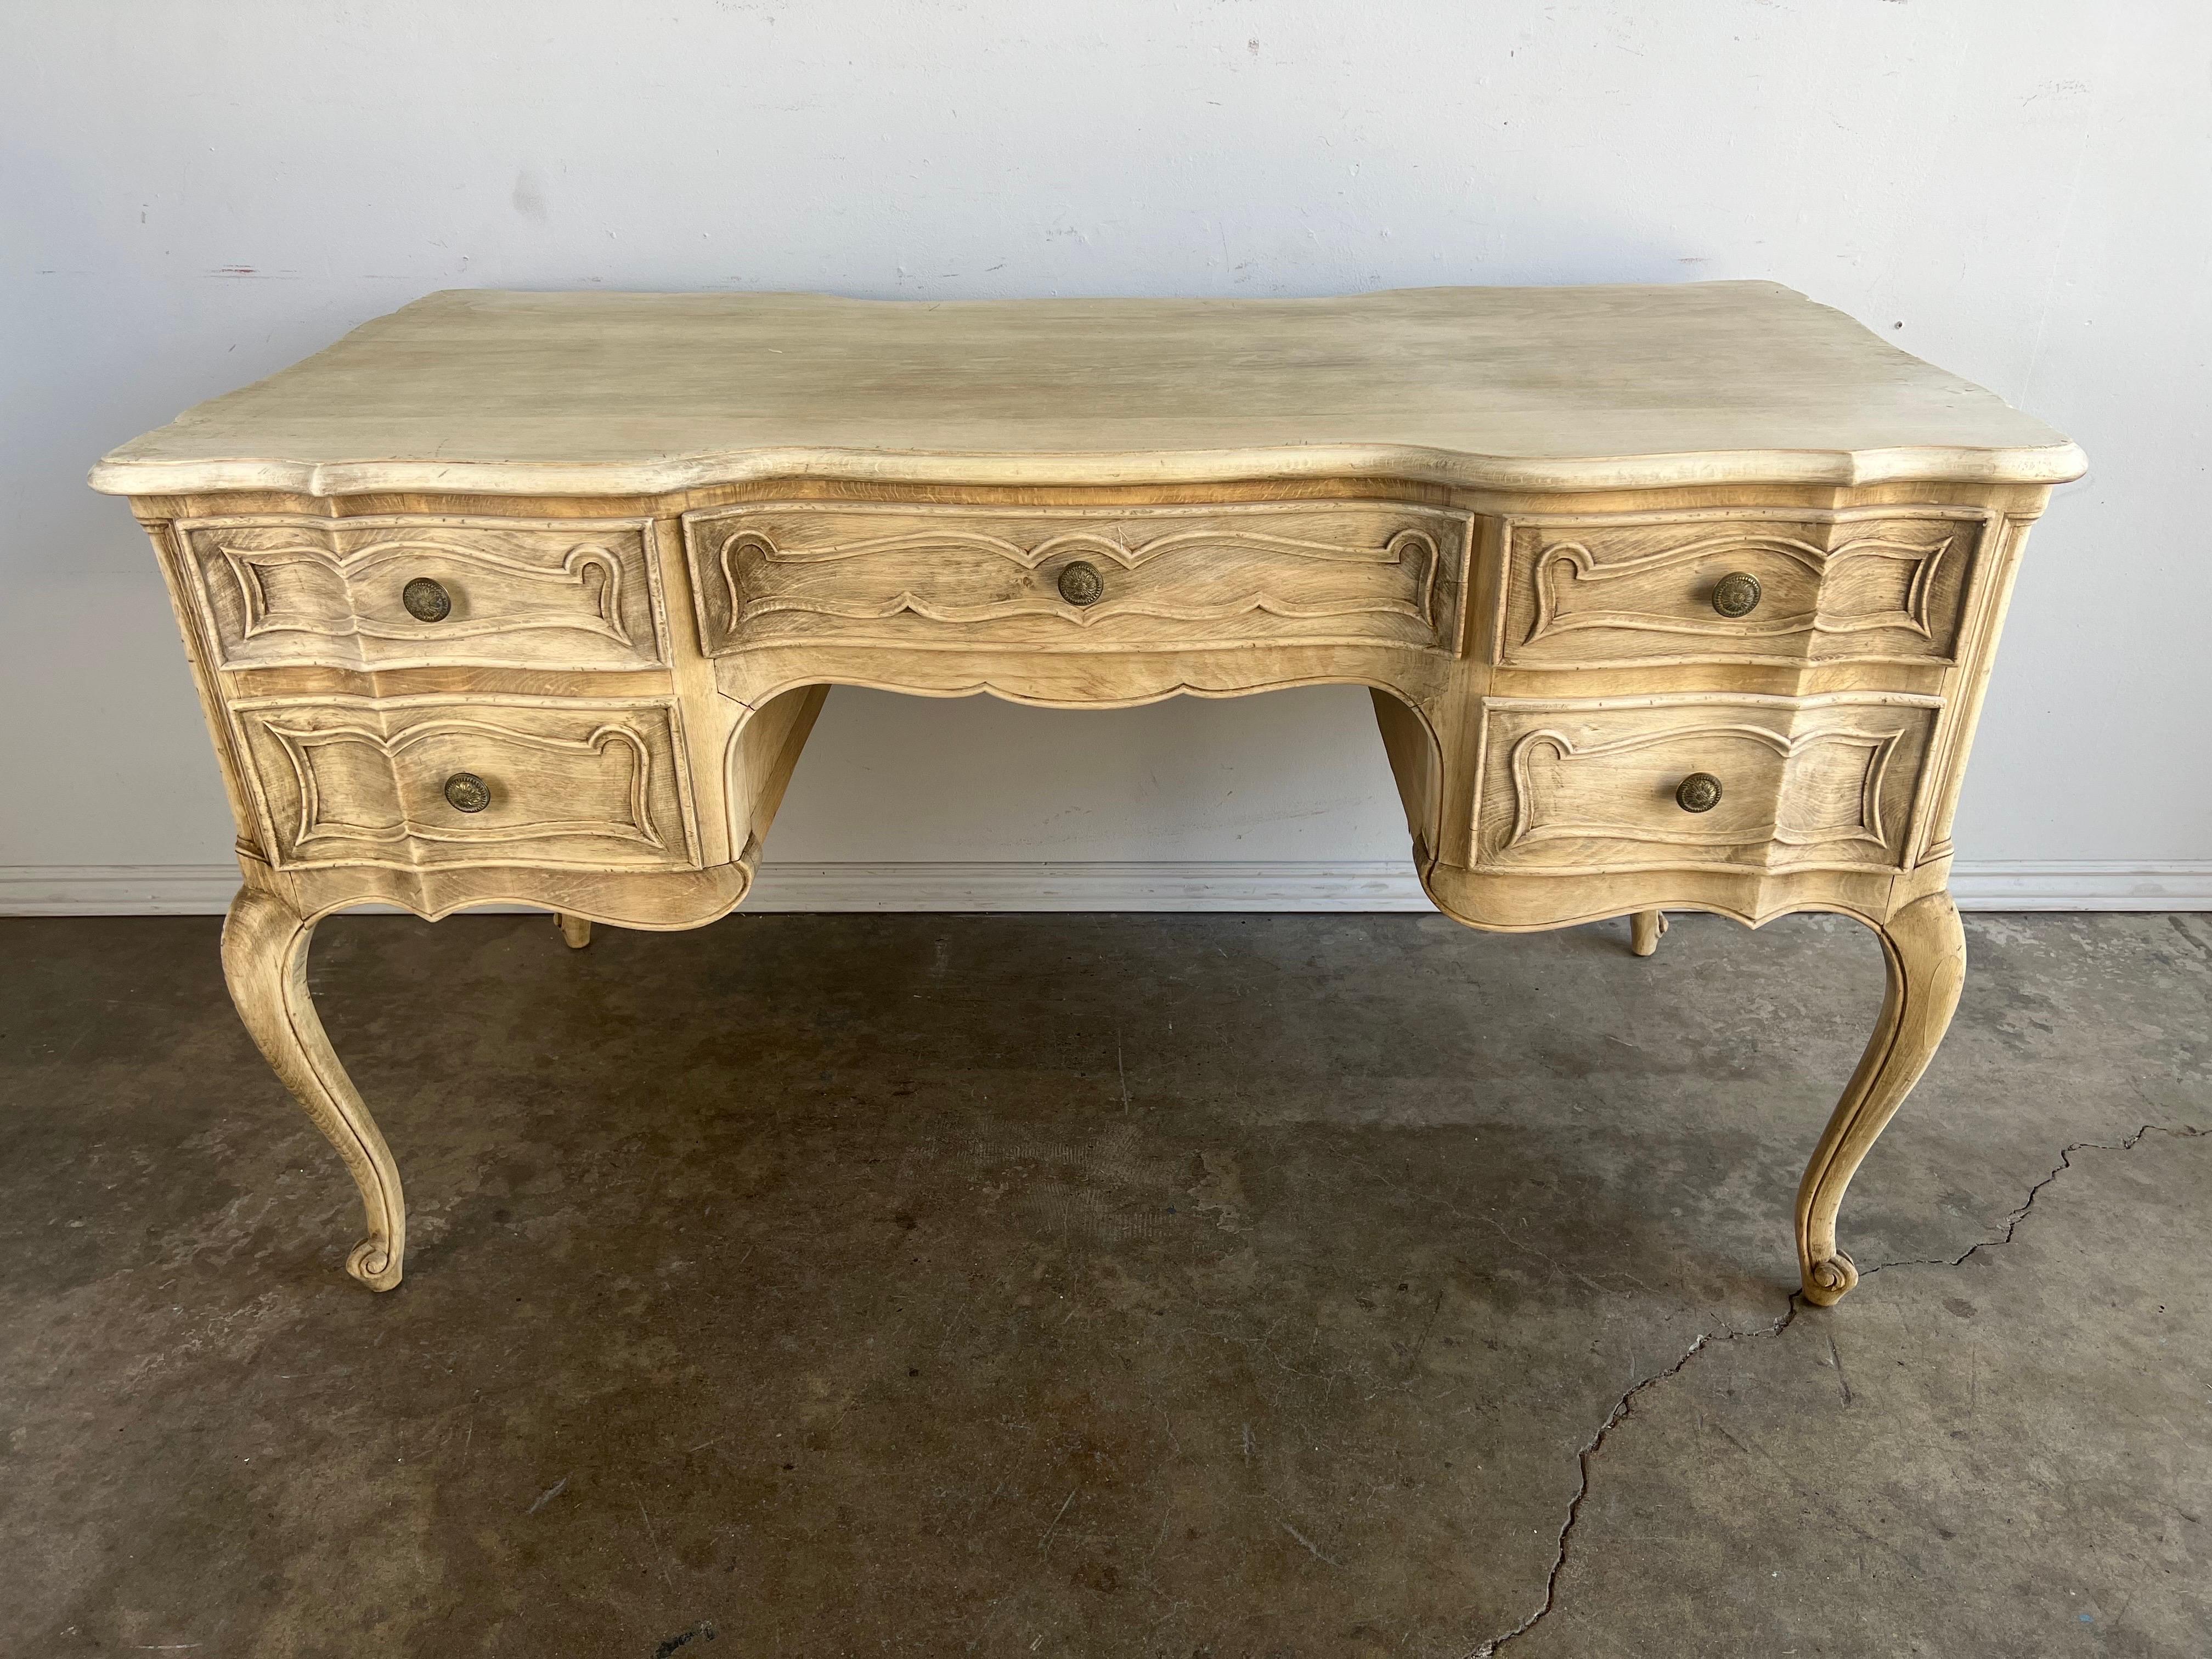 French Provincial French Provencial Style Desk, C. 1930’s For Sale